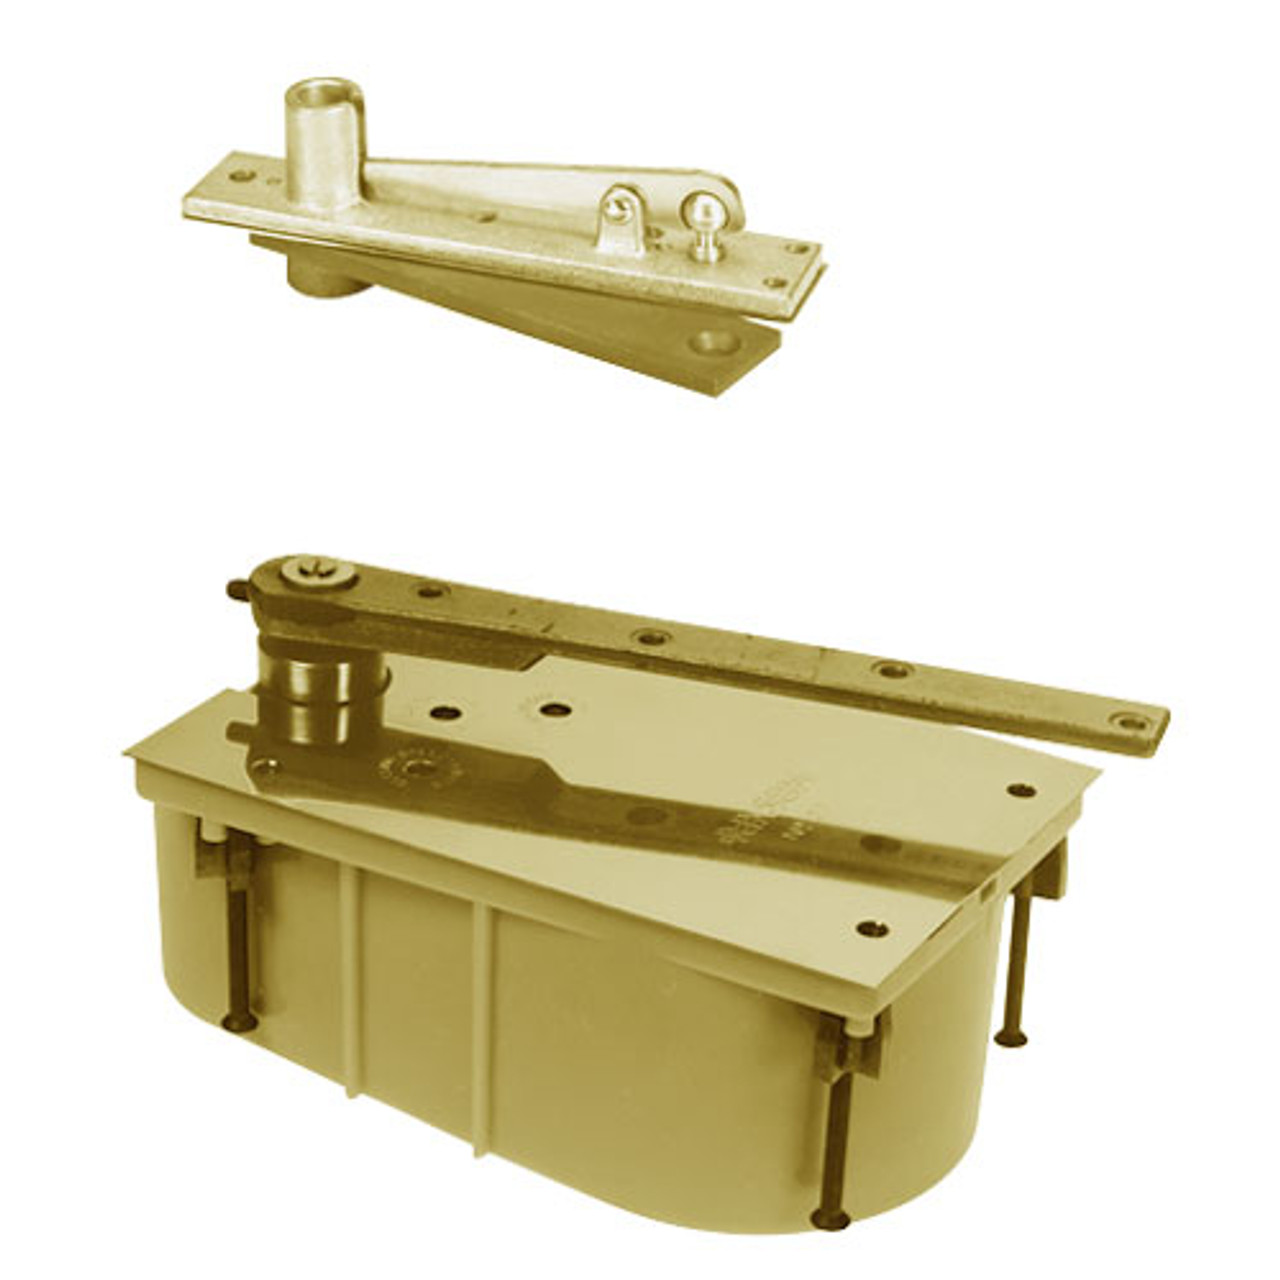 28-105S-554-LFP-LH-606 Rixson 28 Series Heavy Duty Single Acting Center Hung Floor Closer with Concealed Arm in Satin Brass Finish